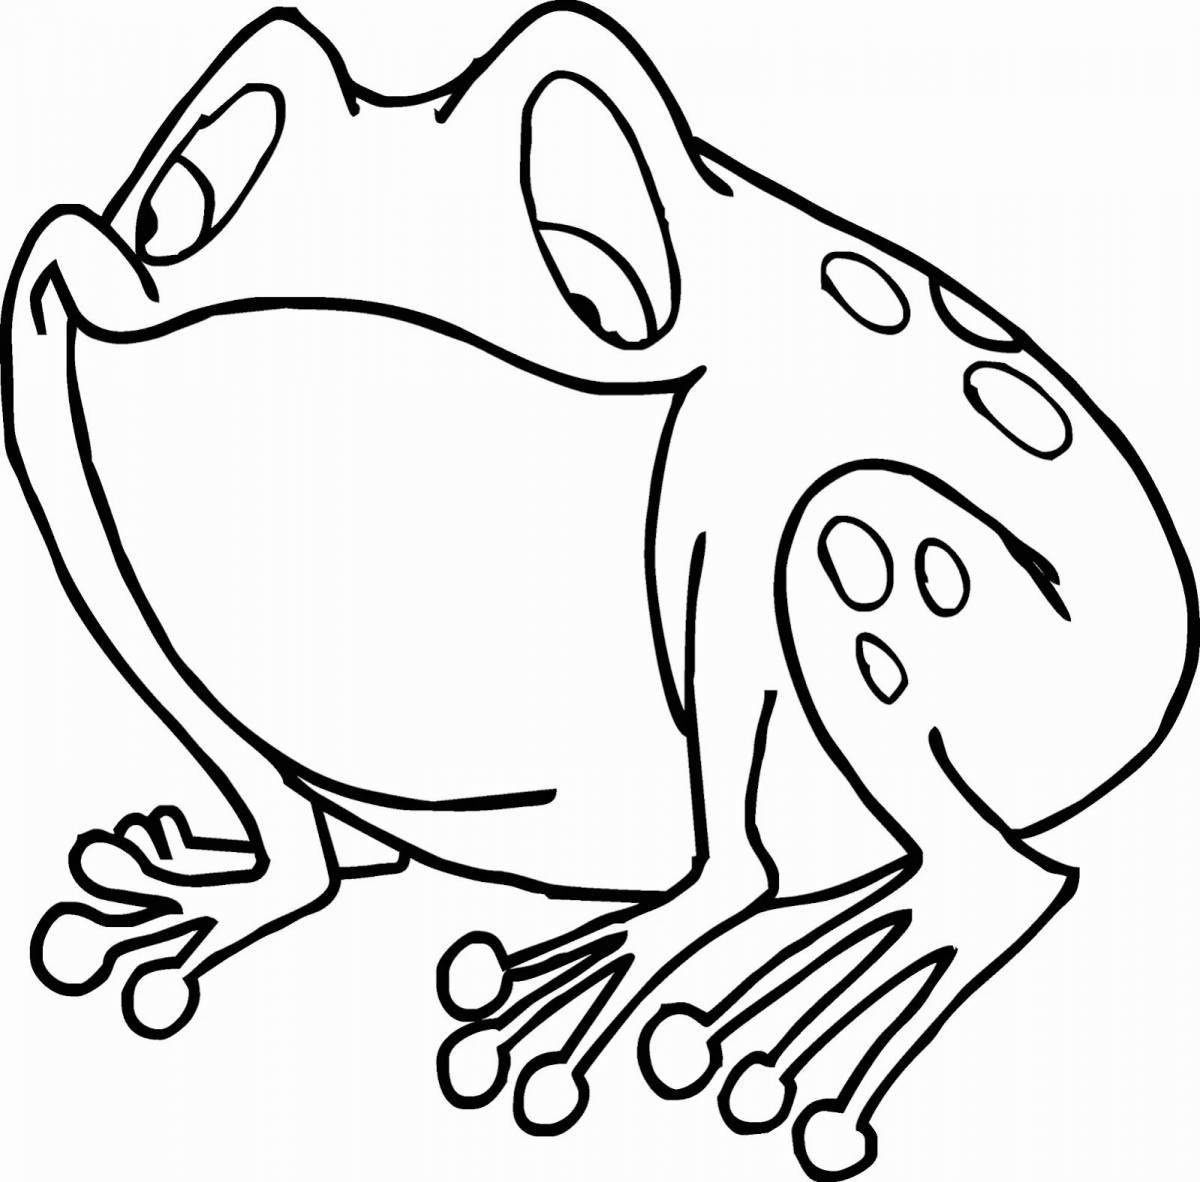 Coloring cartoon grinning frog